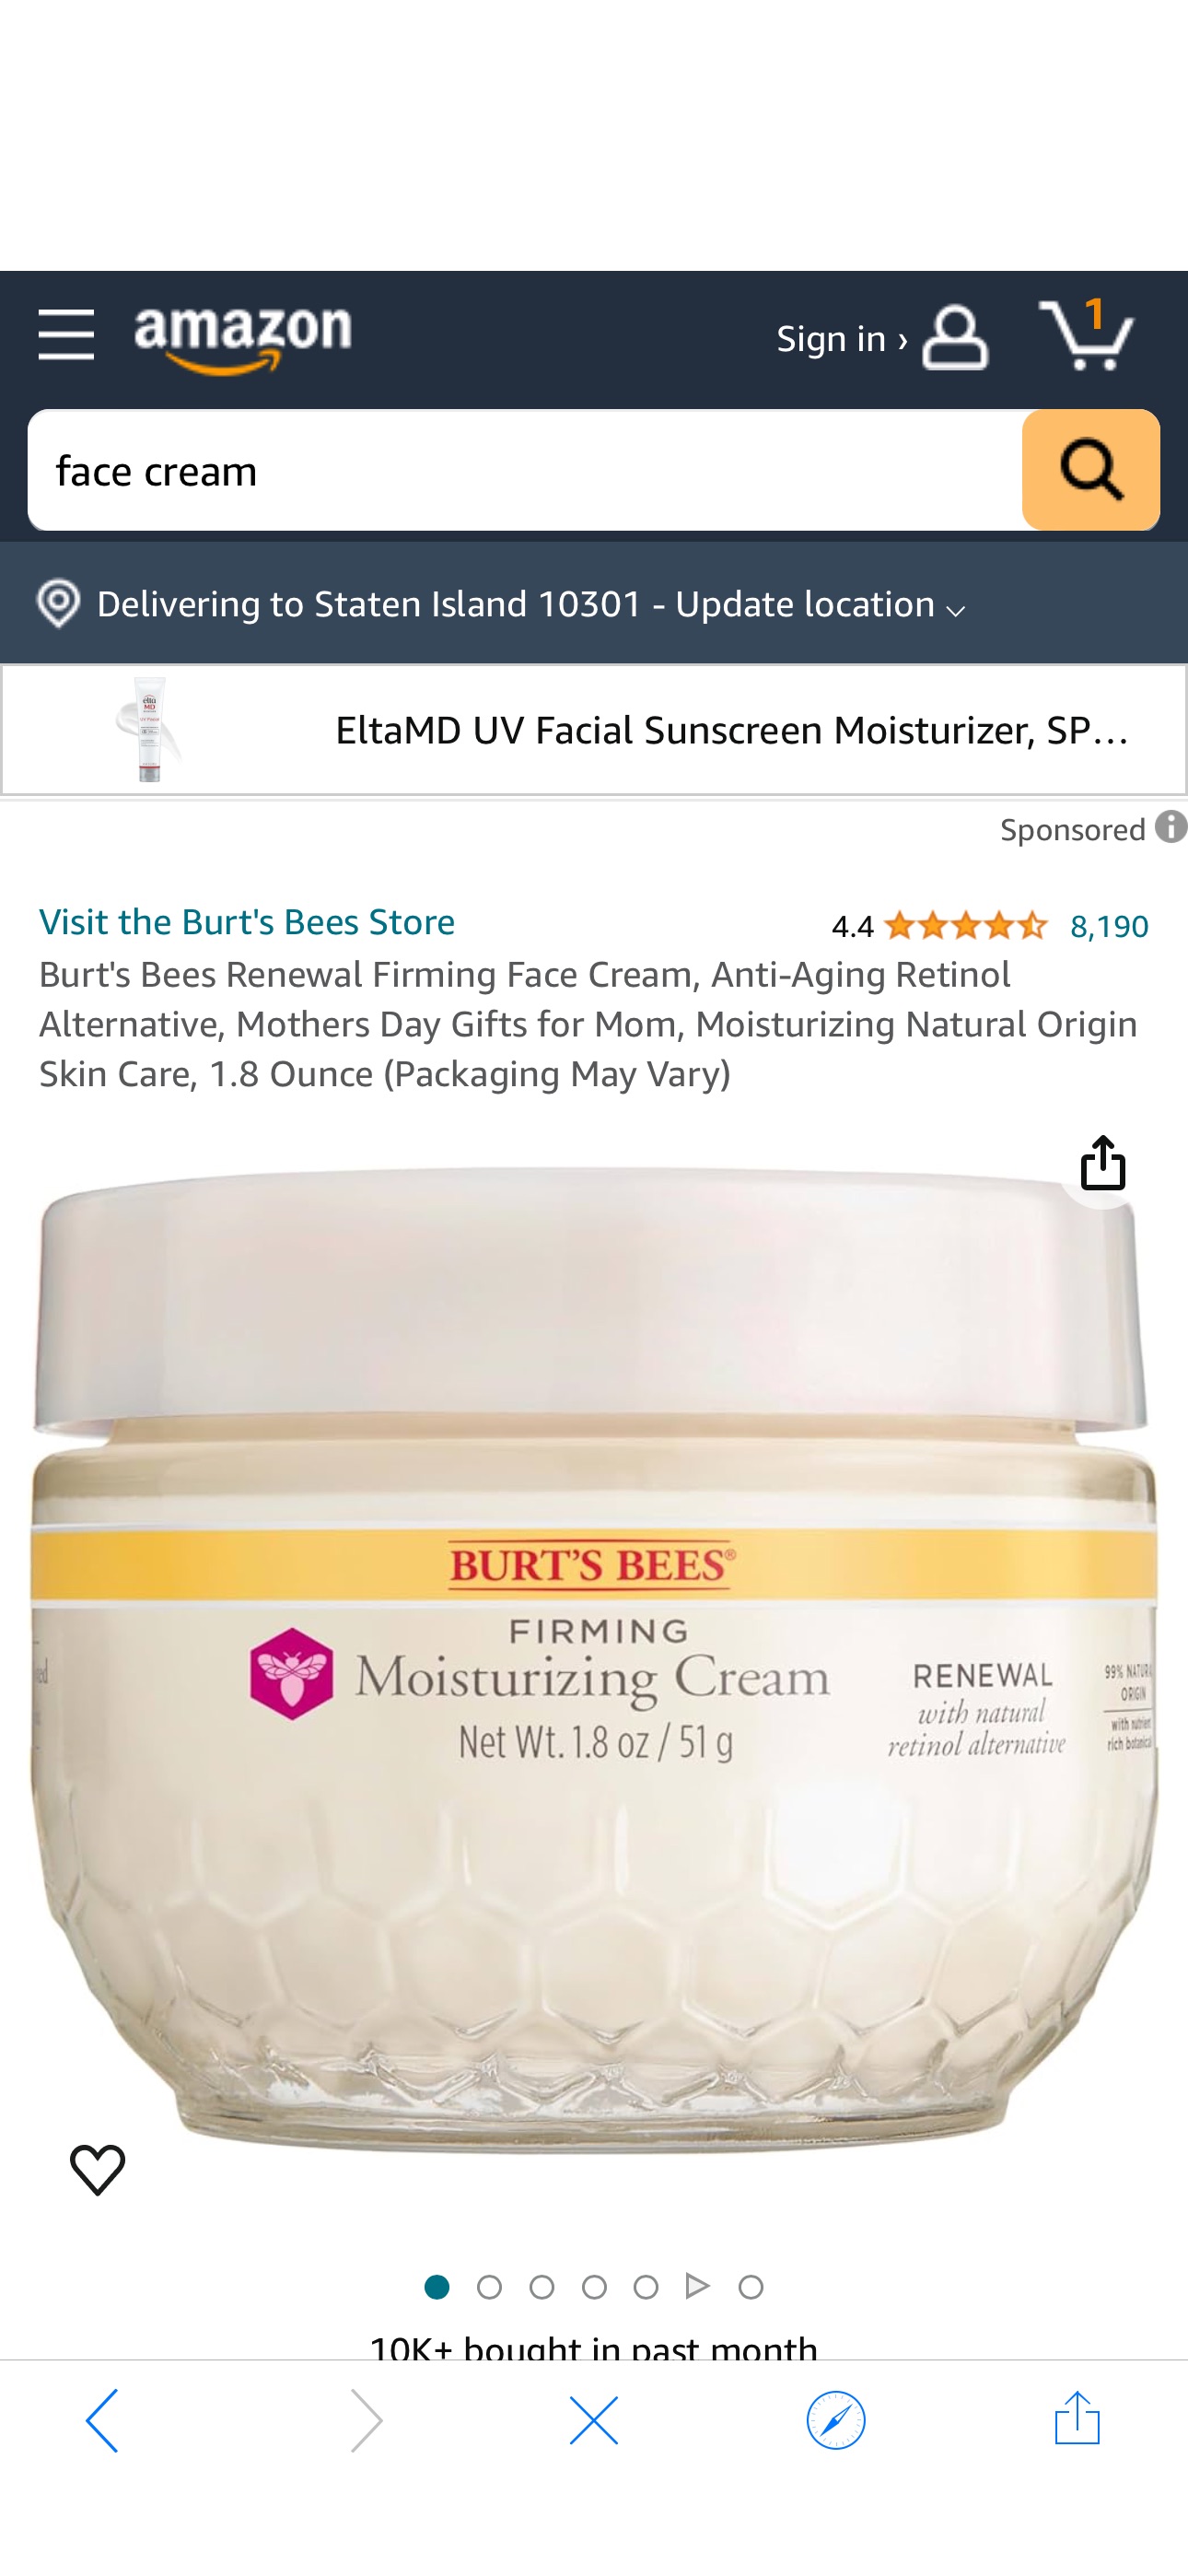 Amazon.com: Burt's Bees Renewal Firming Face Cream, Anti-Aging Retinol Alternative, Mothers Day Gifts for Mom, Moisturizing Natural Origin Skin Care, 1.8 Ounce (Packaging May Vary) : Beauty & Personal